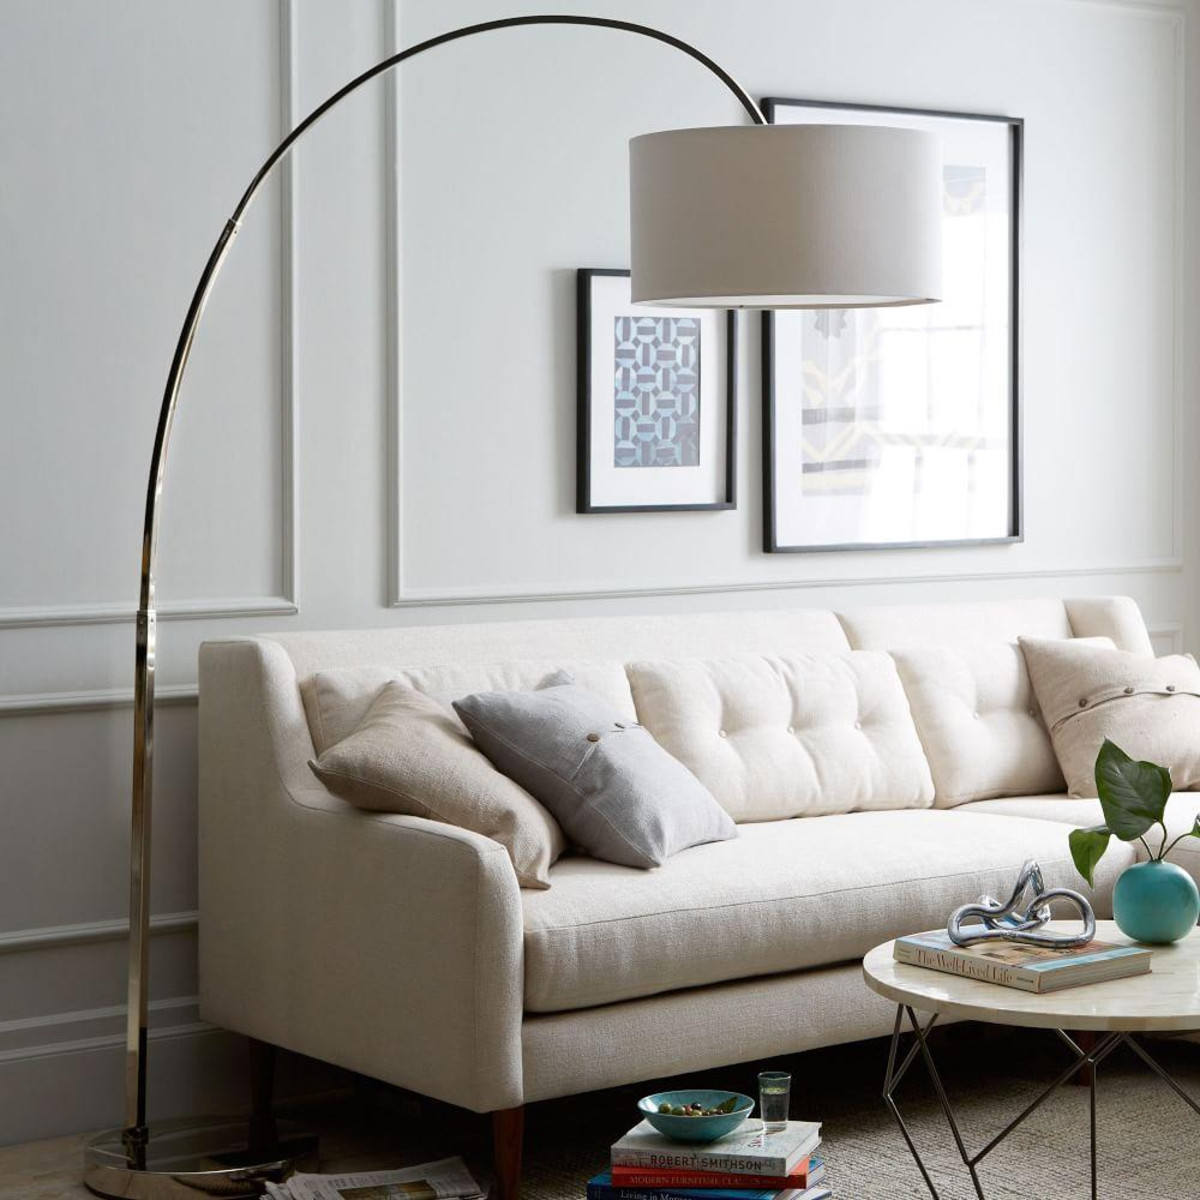 Overarching Floor Lamp Room Disacode Home Design From in sizing 1200 X 1200